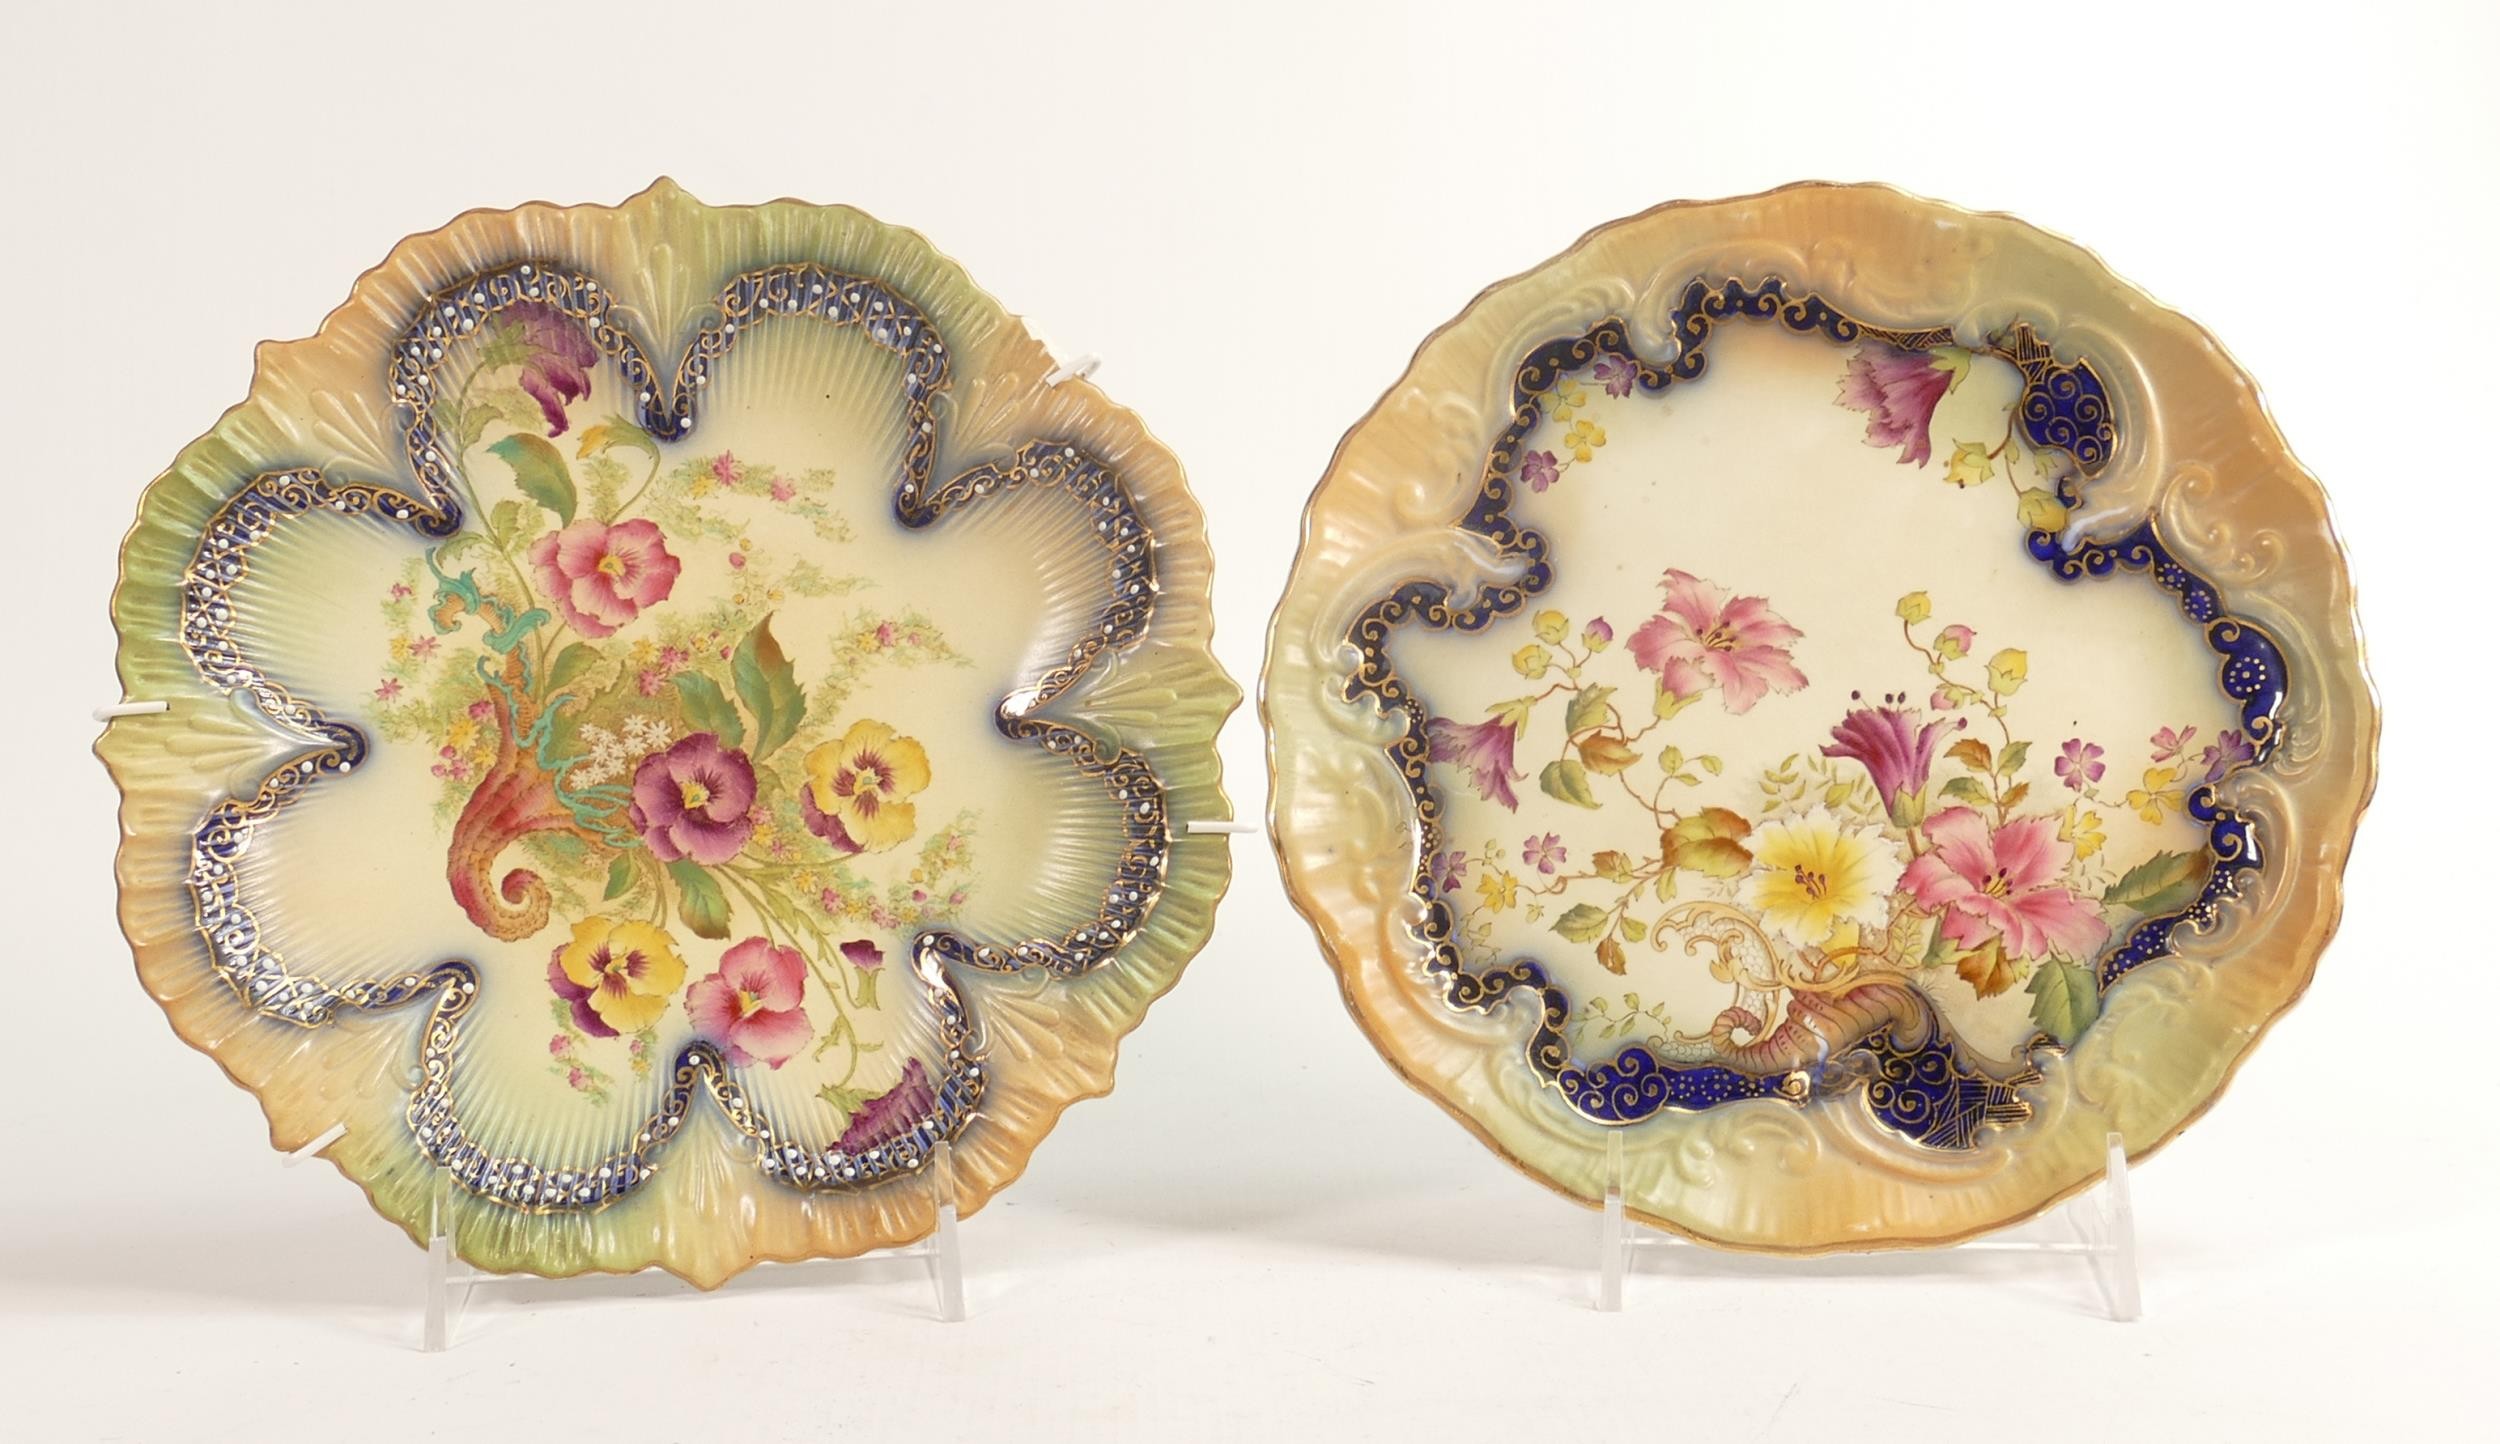 Carlton Blush ware cabinet plates with Pansy & floral decoration, by Wiltshaw & Robinson, c1900,